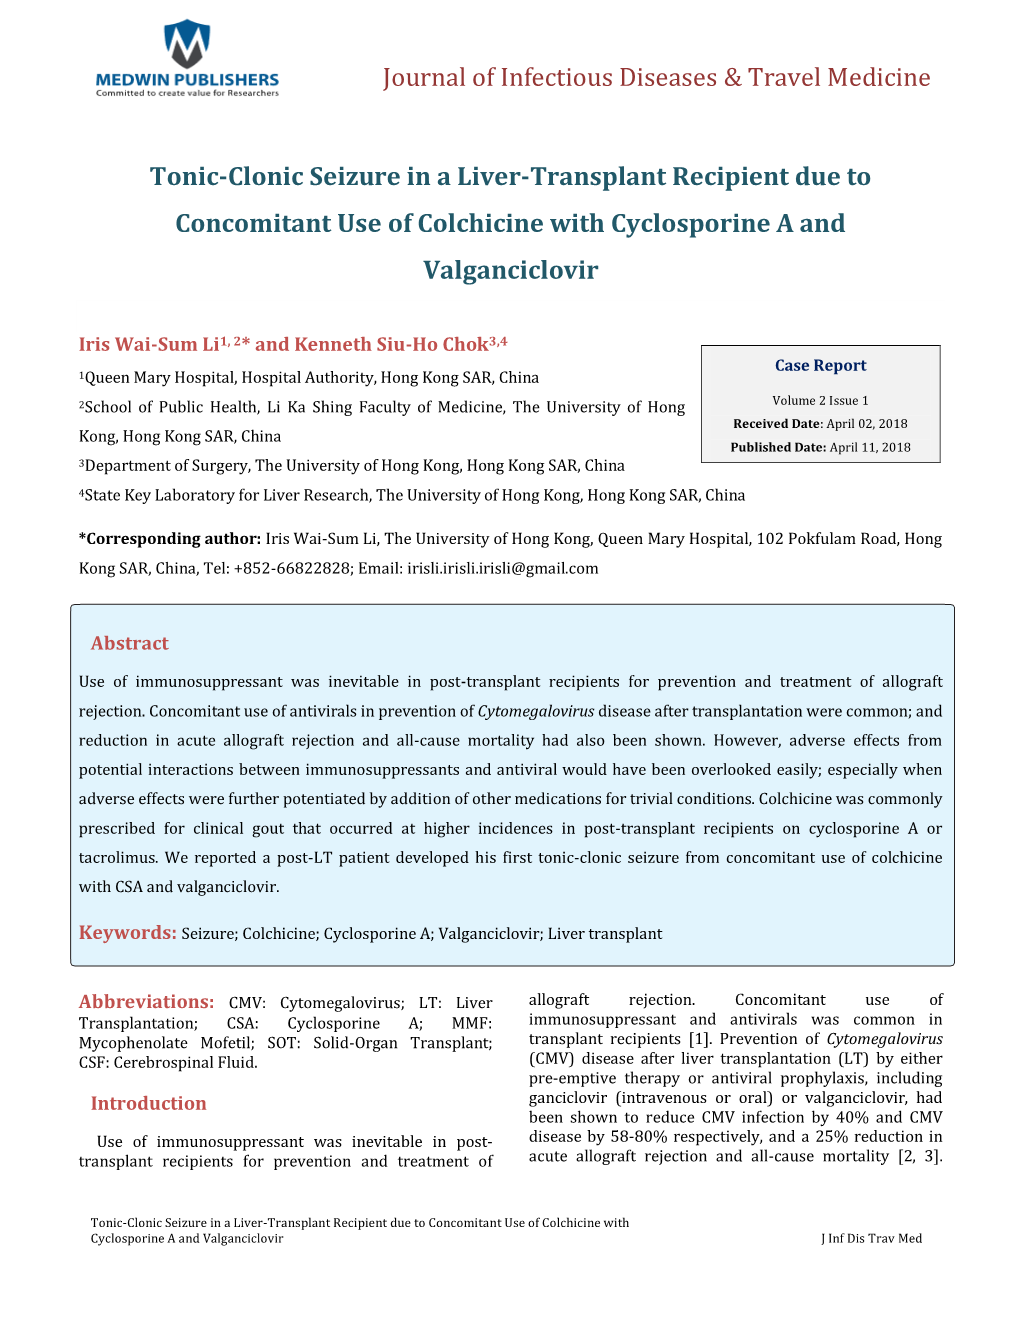 Tonic-Clonic Seizure in a Liver-Transplant Recipient Due to Concomitant Use of Colchicine with Cyclosporine a And